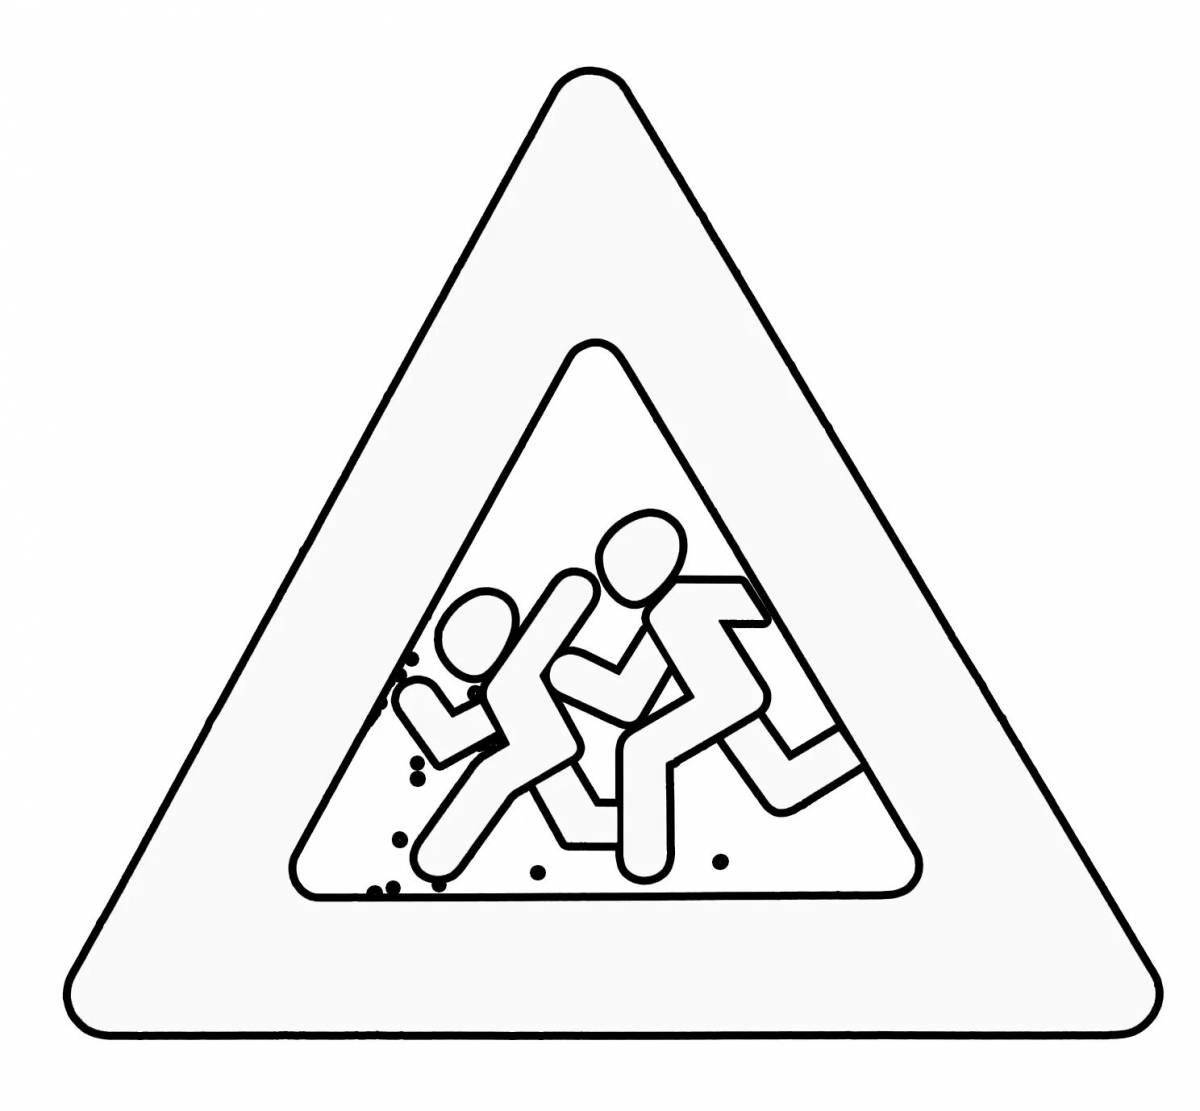 Funny road signs coloring pages for kids